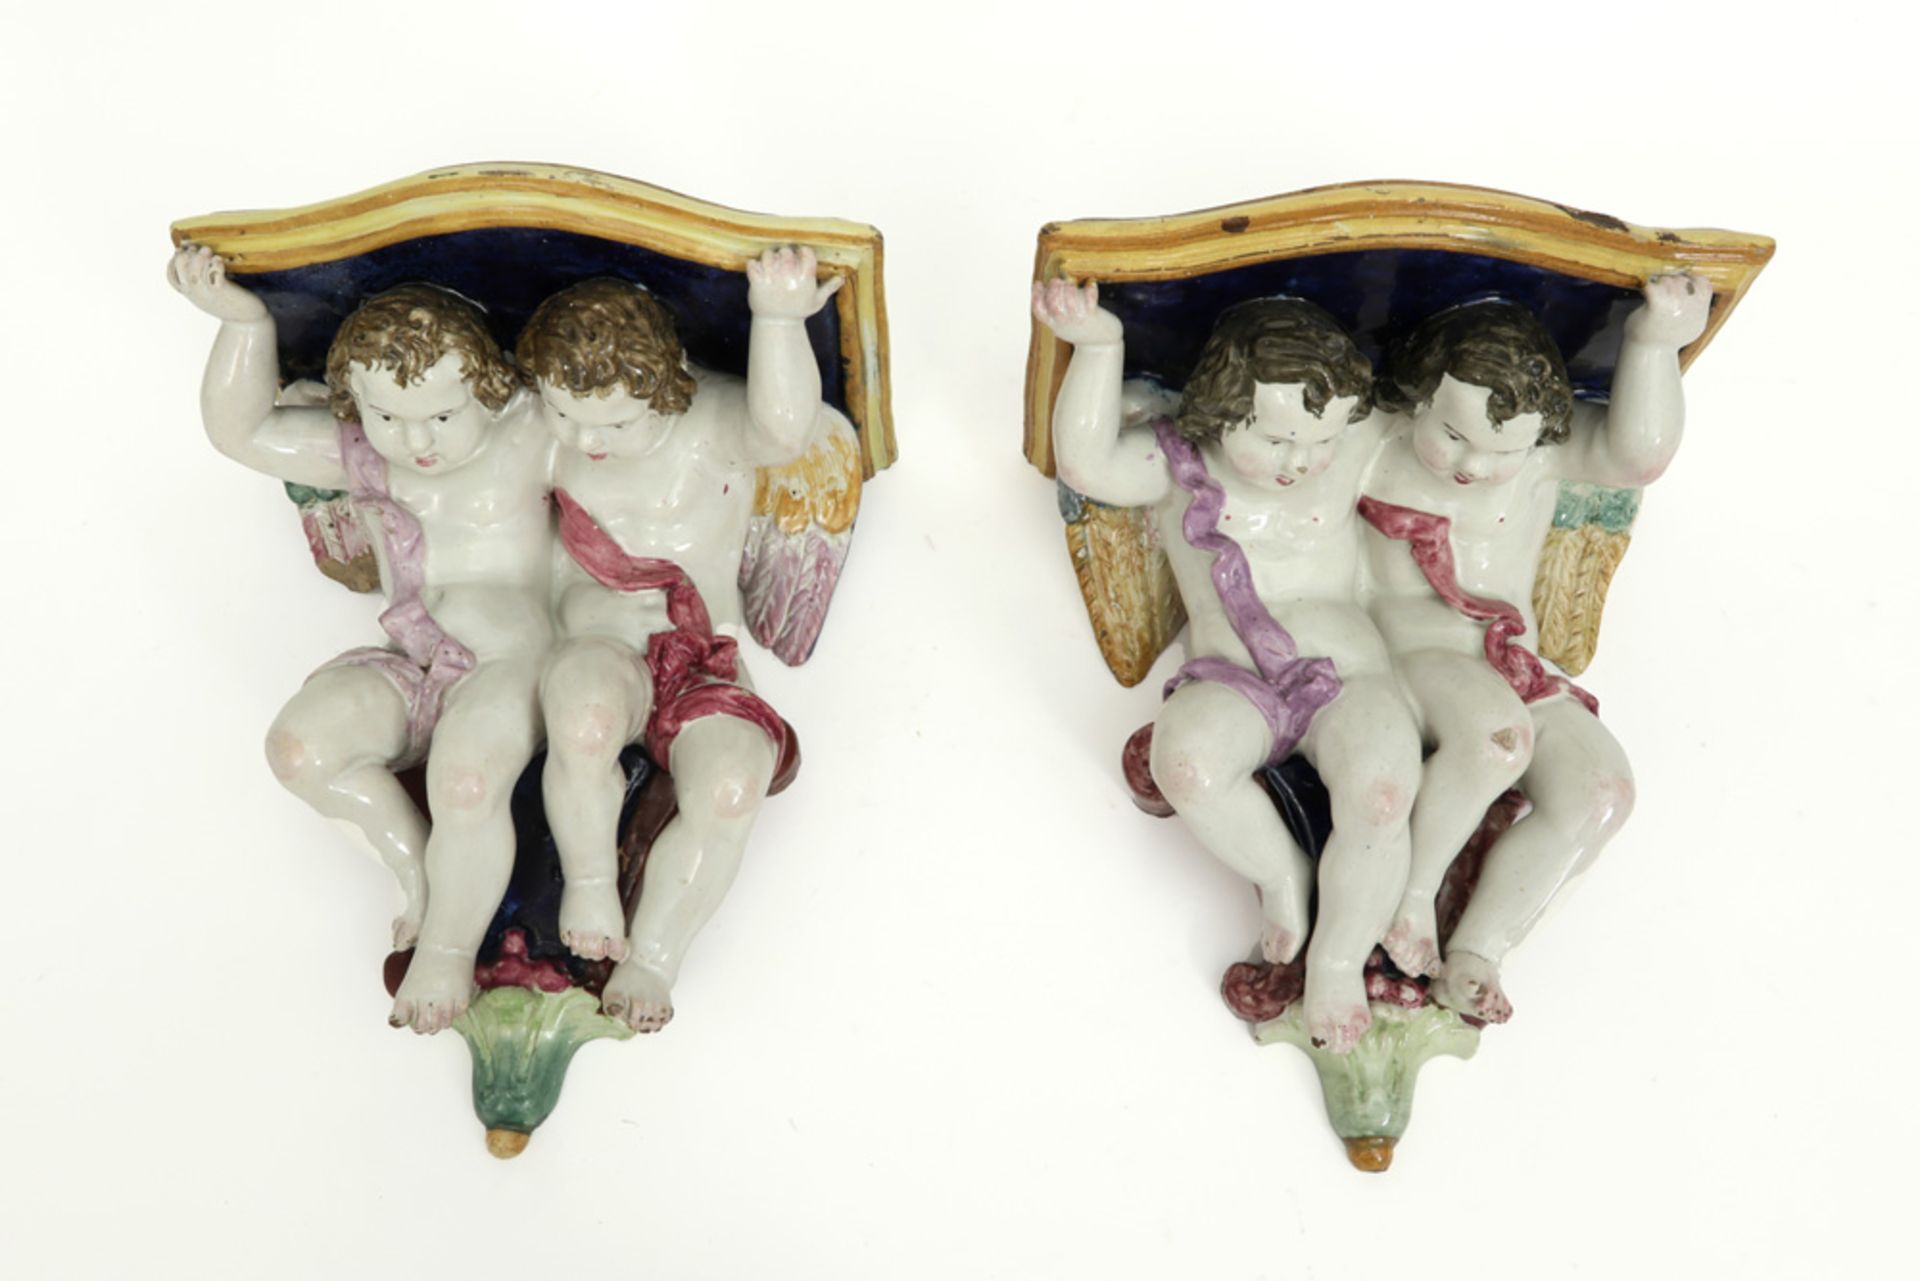 pair of Italian wall hanging consoles, each with two cupids, in polychromed ceramic  - Image 2 of 4